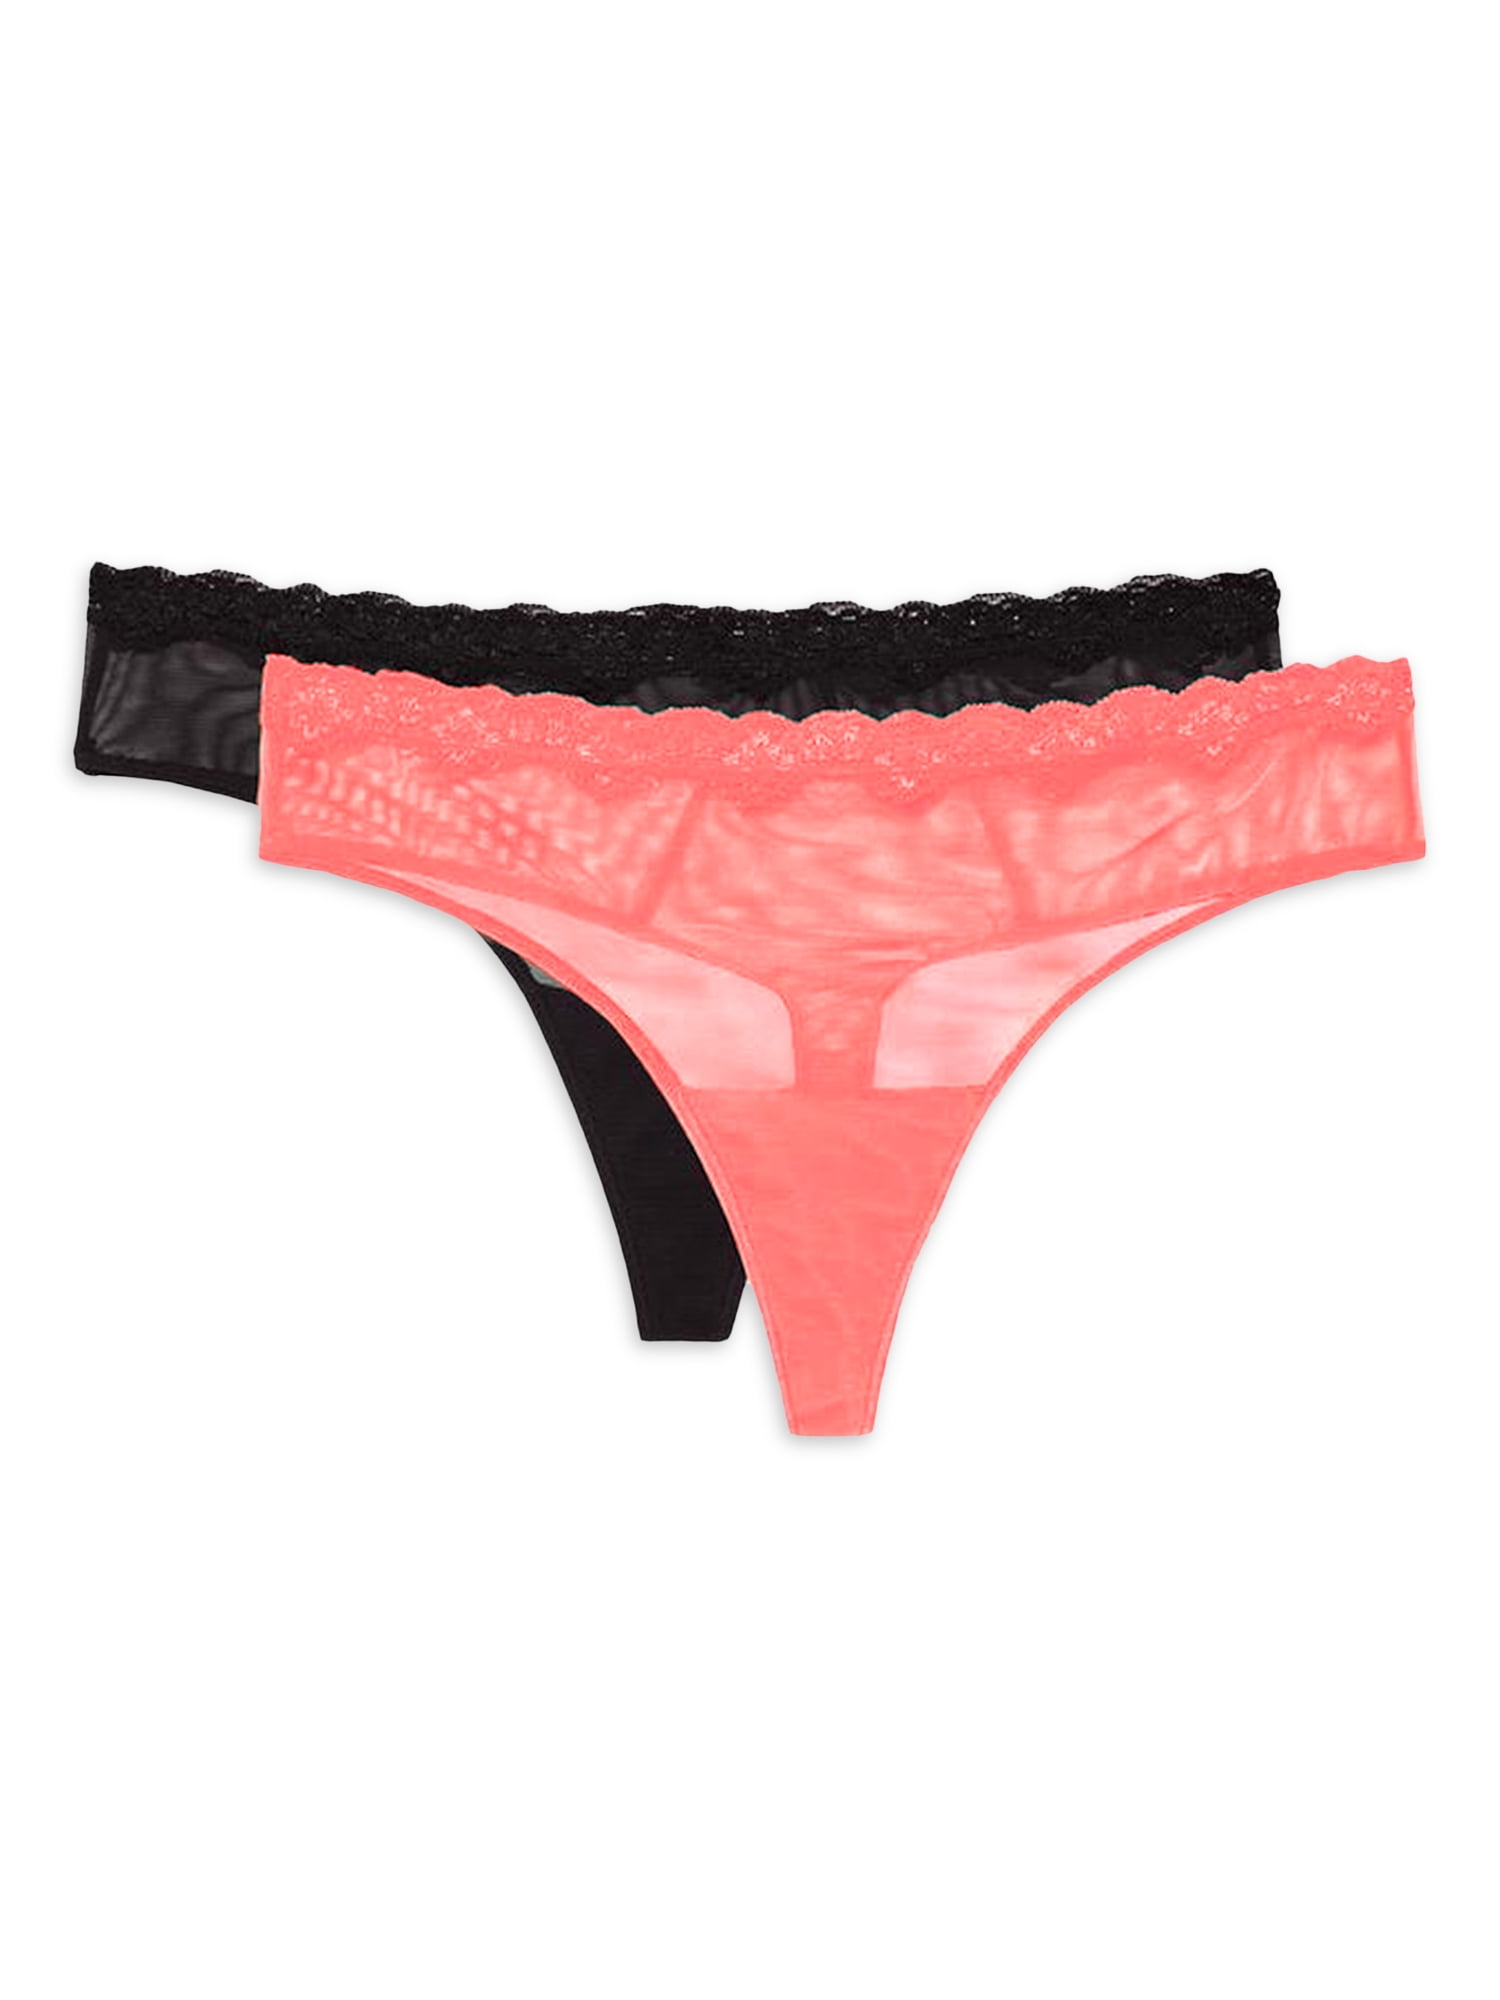 Details about    Women's Underwear Lace Band Cotton Thong Panties